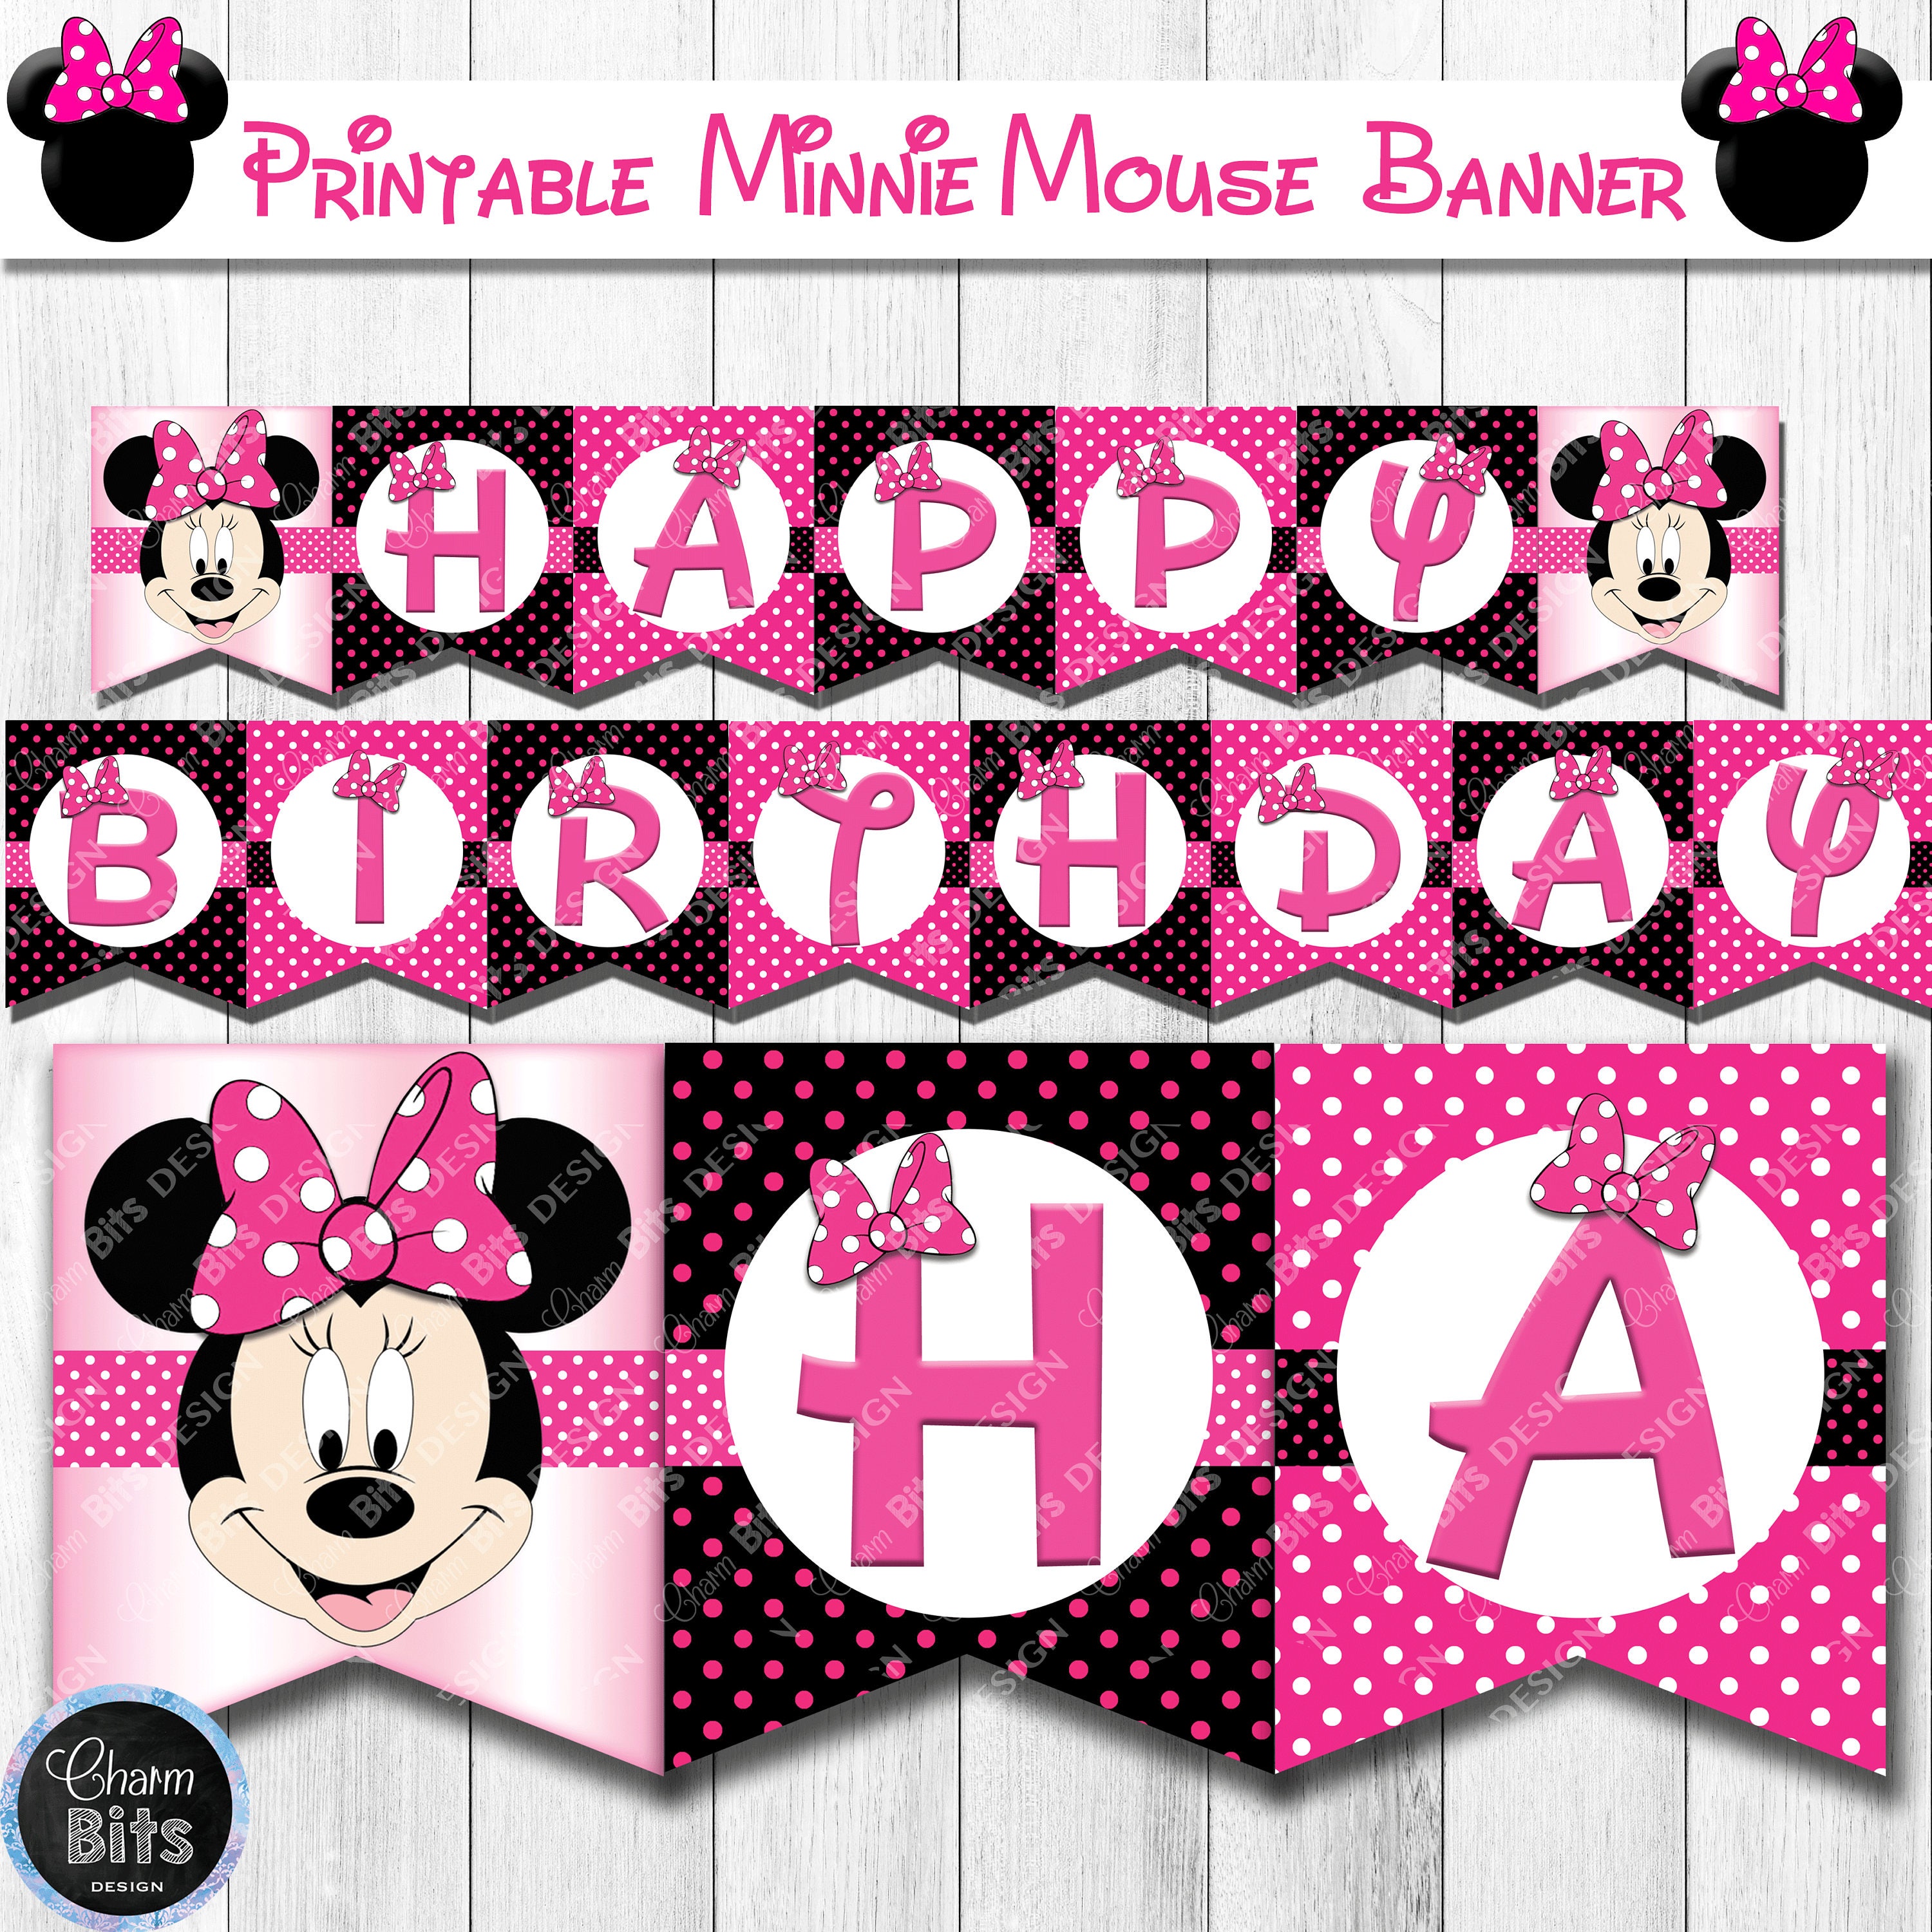 minnie-mouse-banner-printable-minnie-mouse-birthday-banner